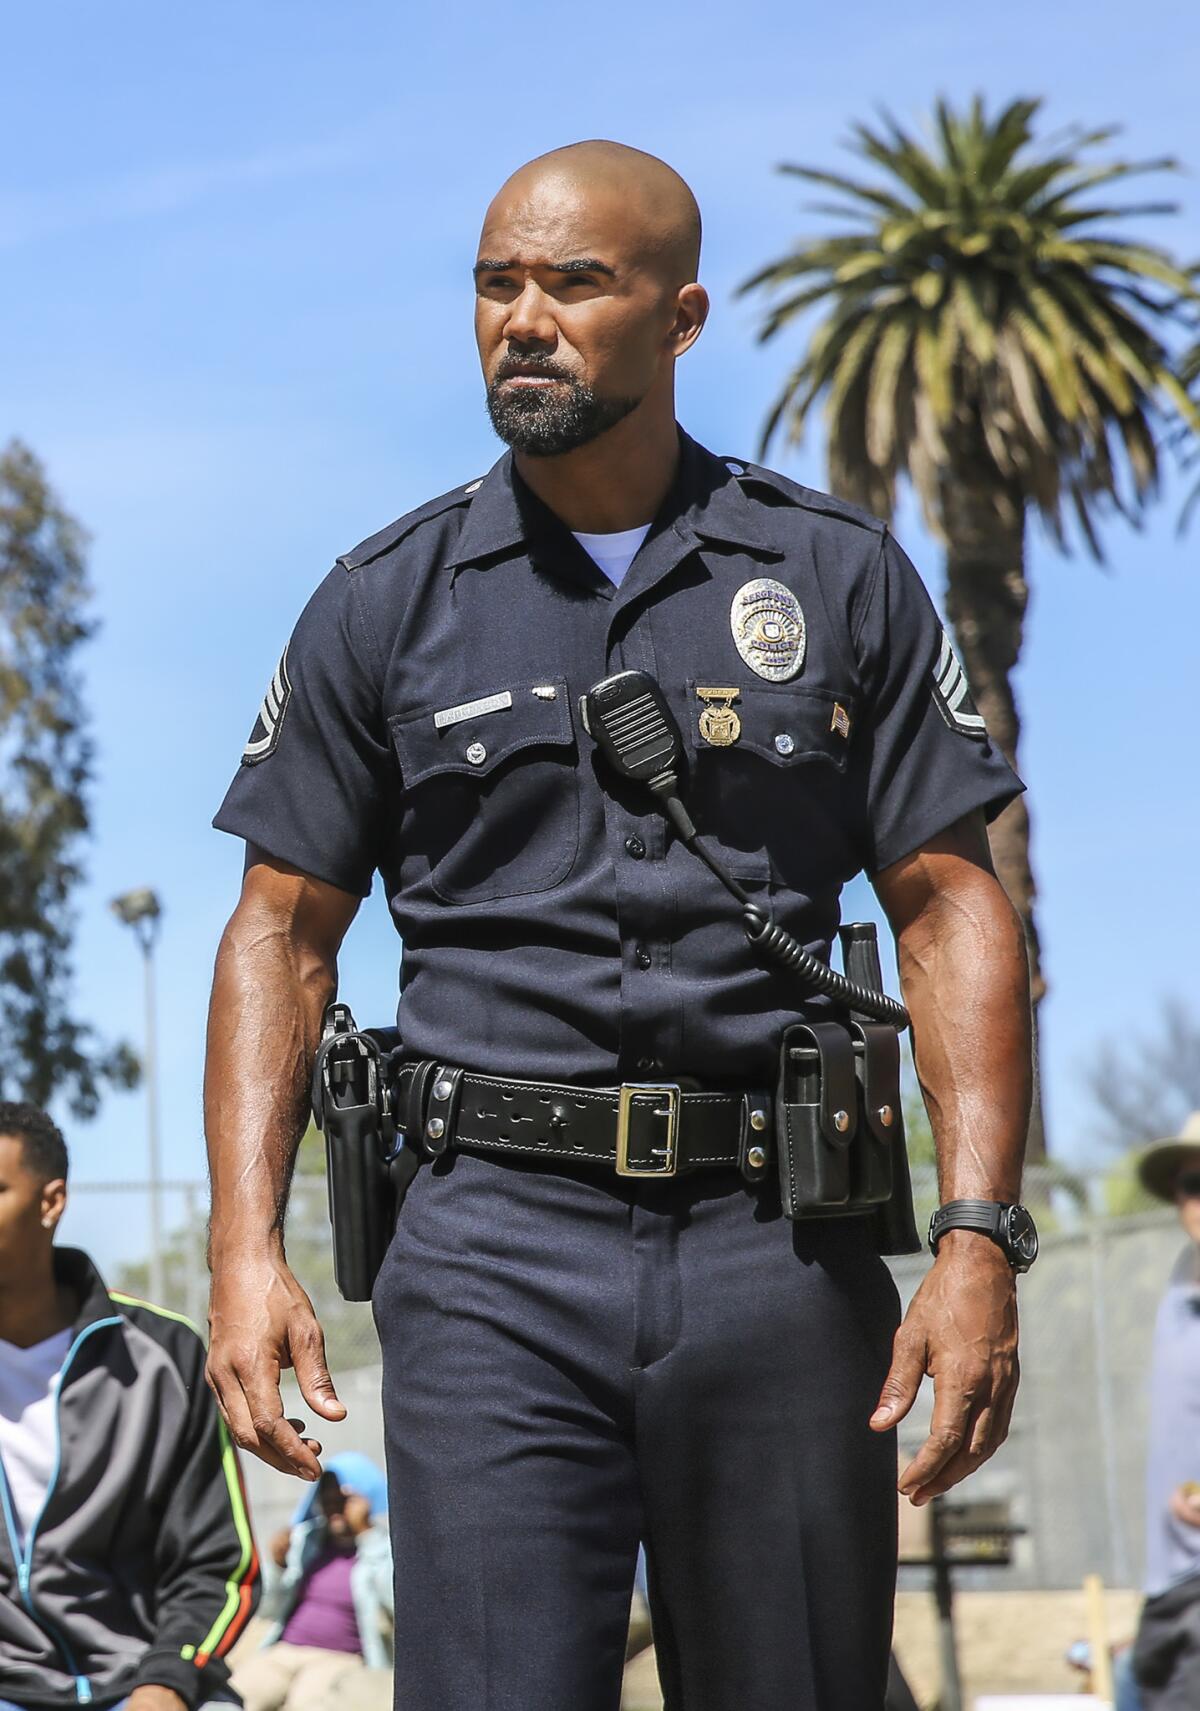 An actor is dressed in a police uniform in a scene from the TV show 'S.W.A.T.'